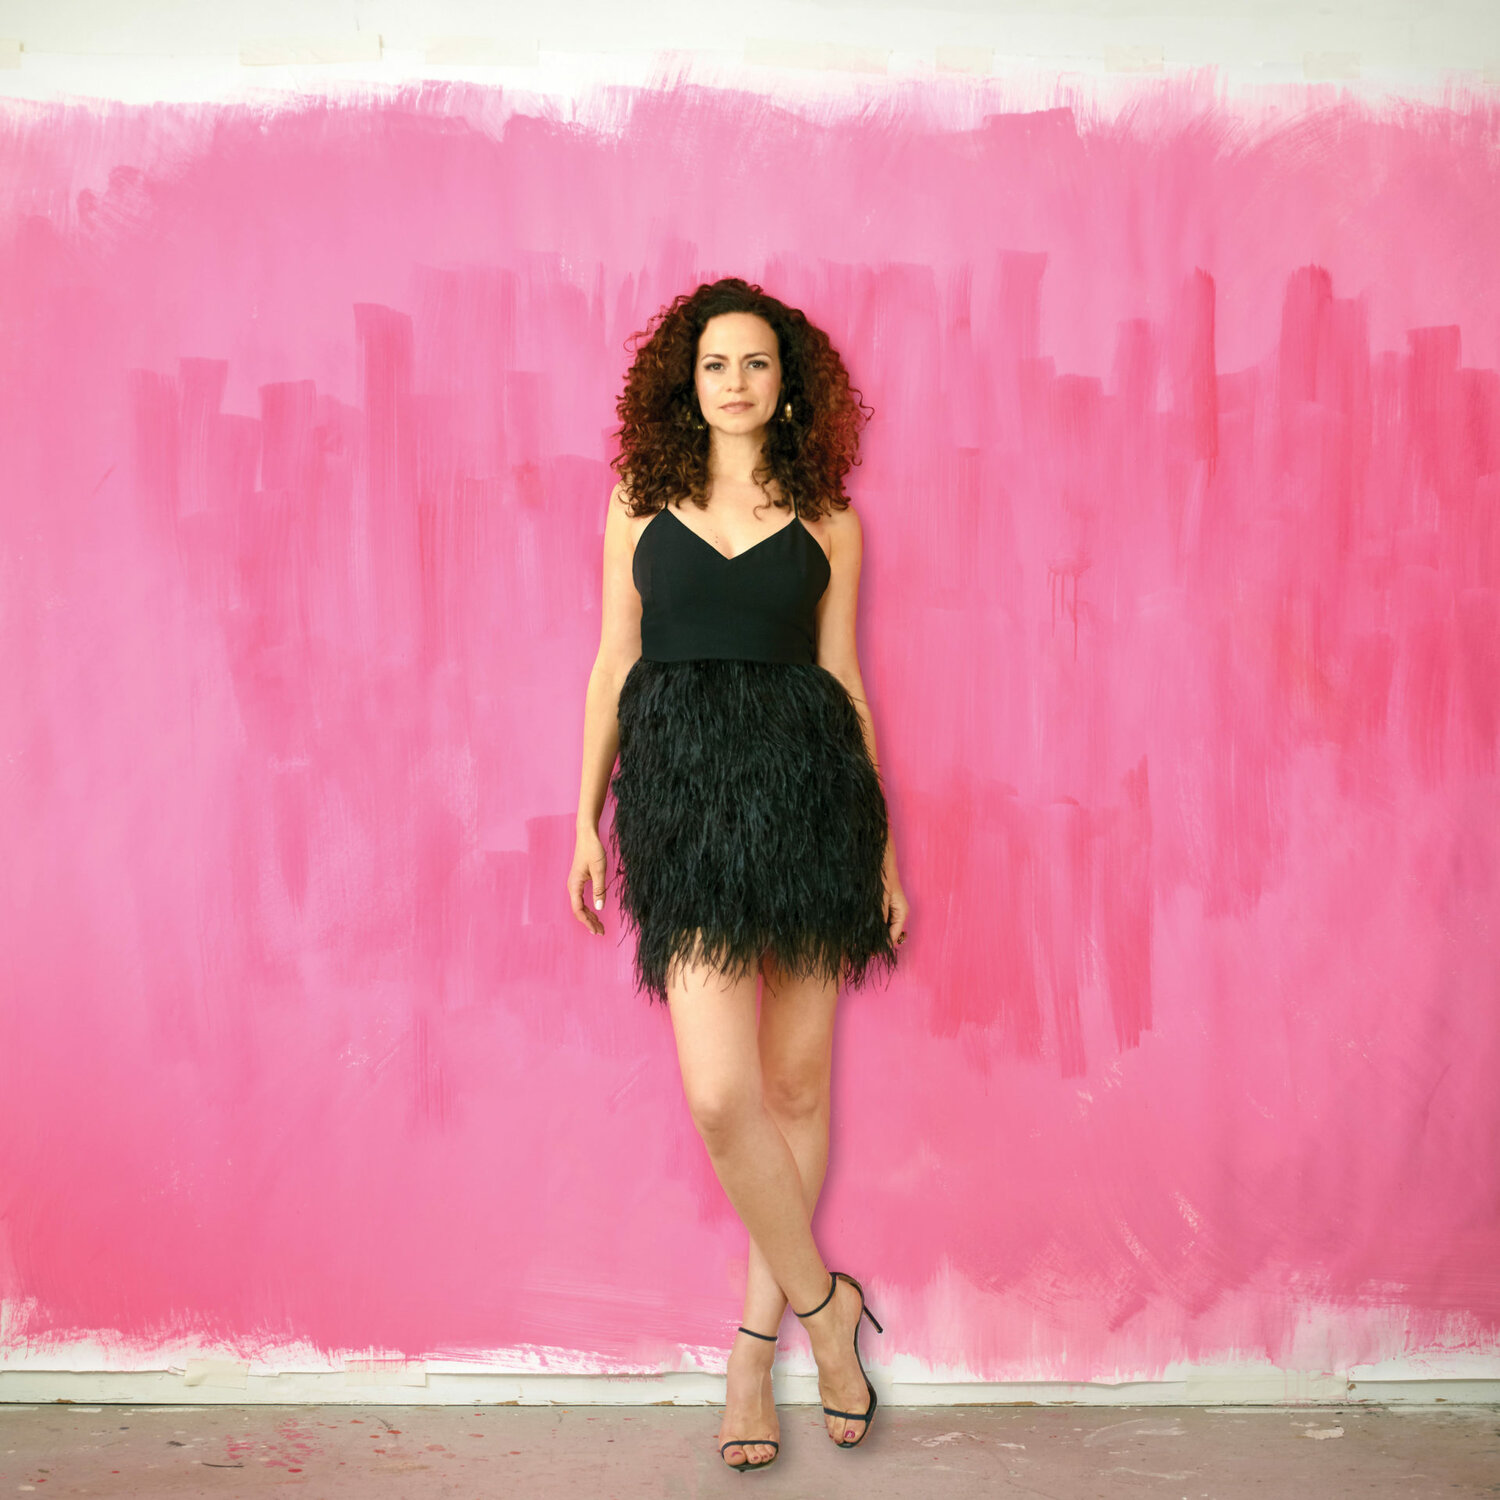 After appearing in Tony-winning Broadway productions like “In the Heights,” “Wicked” and “Hamilton,” Mandy Gonzalez visited the Wharton Center’s Pasant Theatre as part of her solo concert tour.